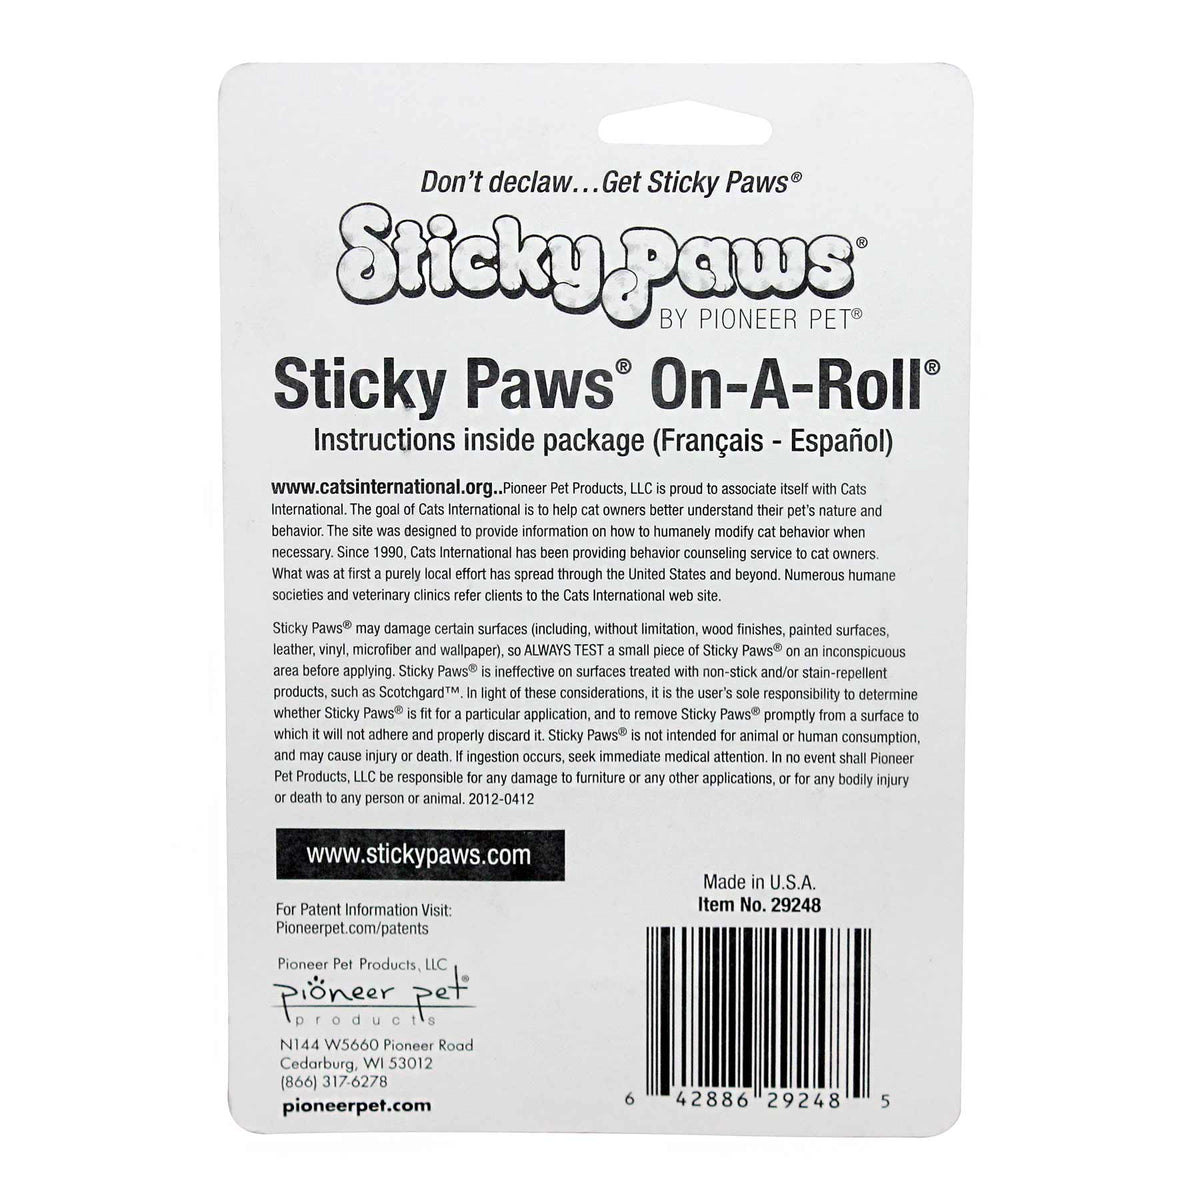 Sticky Paws Cat Scratching Deterrent